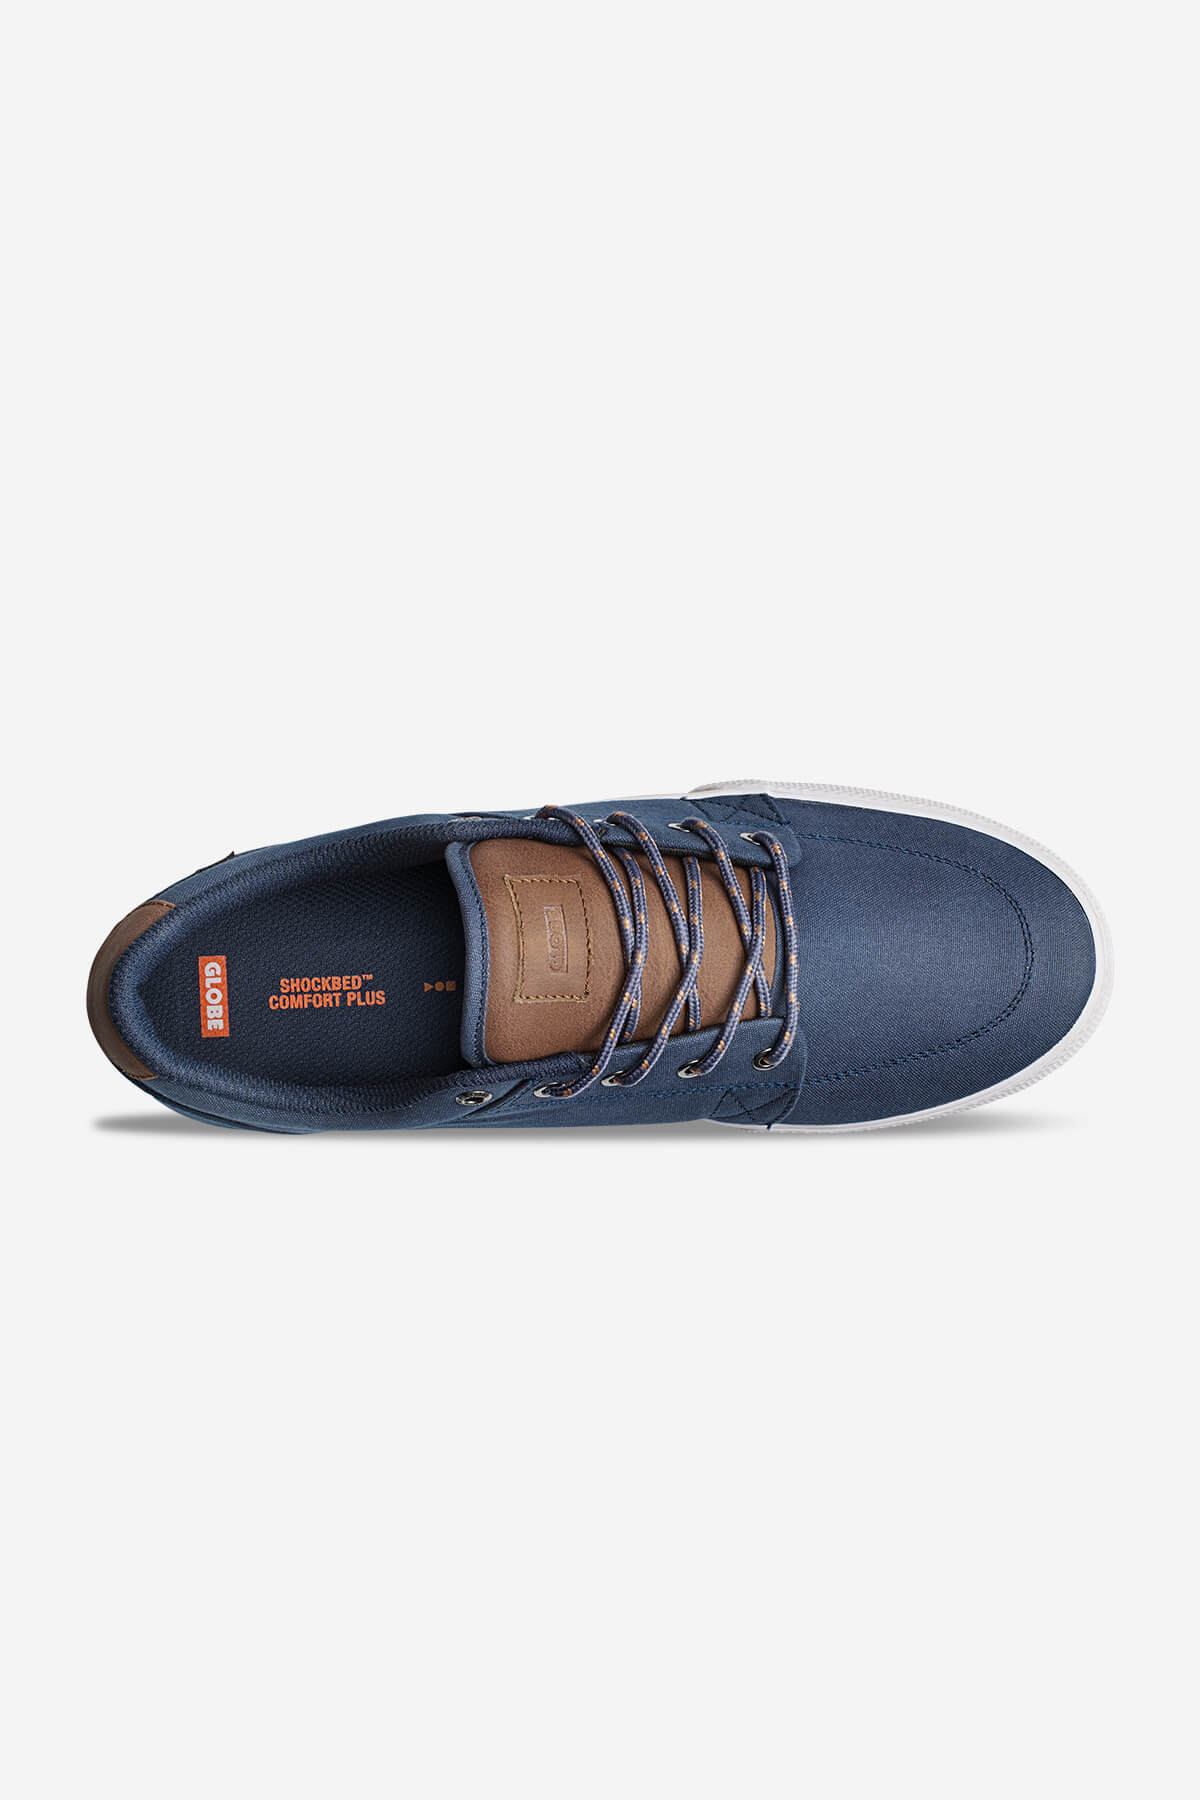 Globe Low shoes GS - Midnight in Midnight